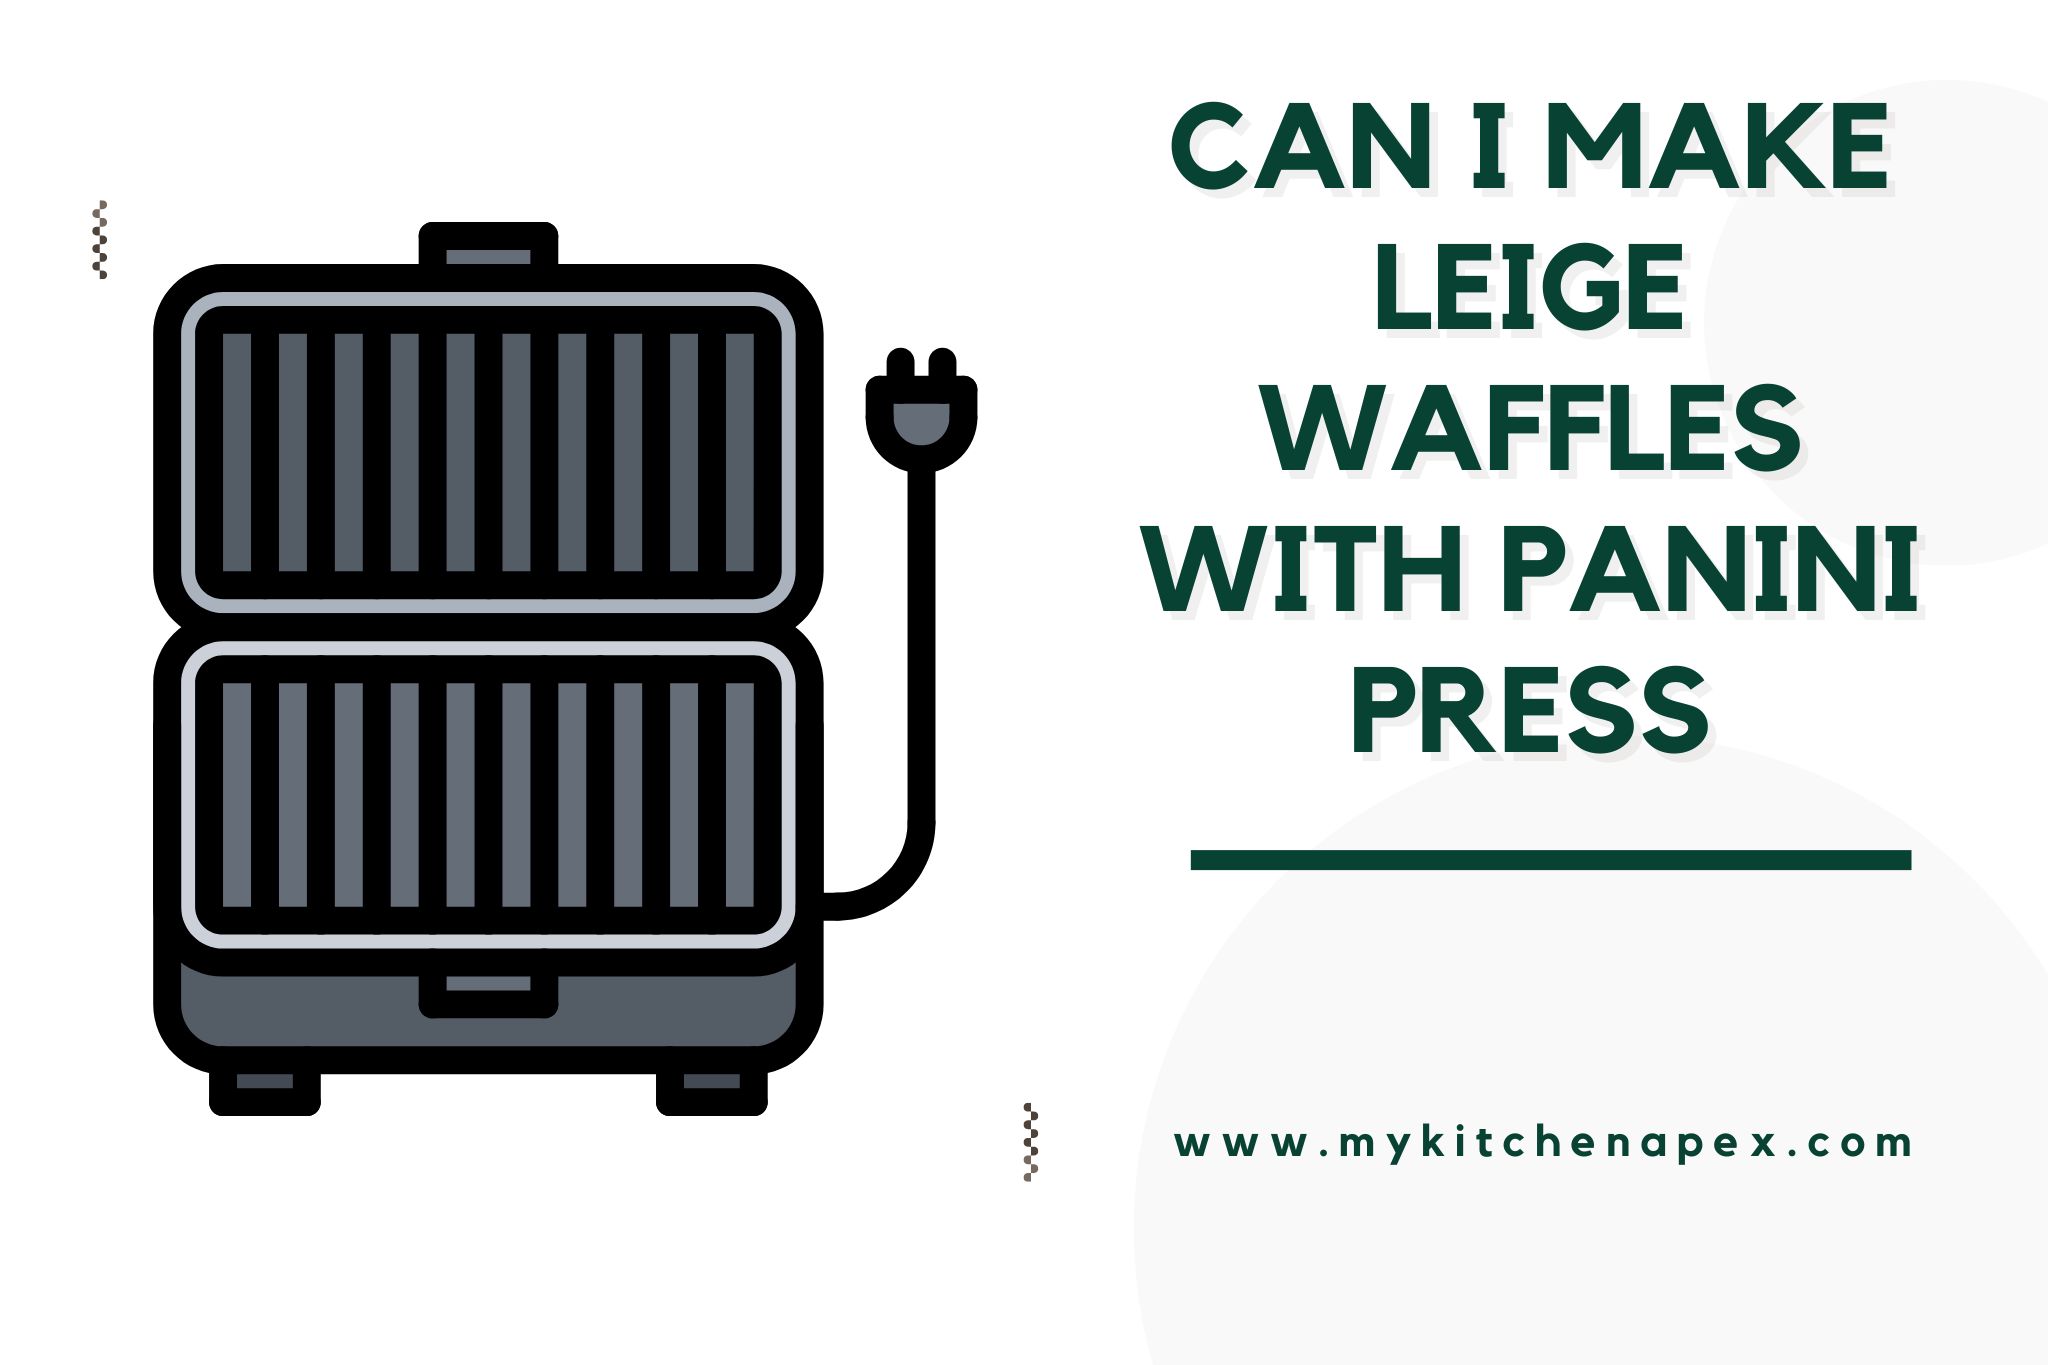 can i make leige waffles with panini press